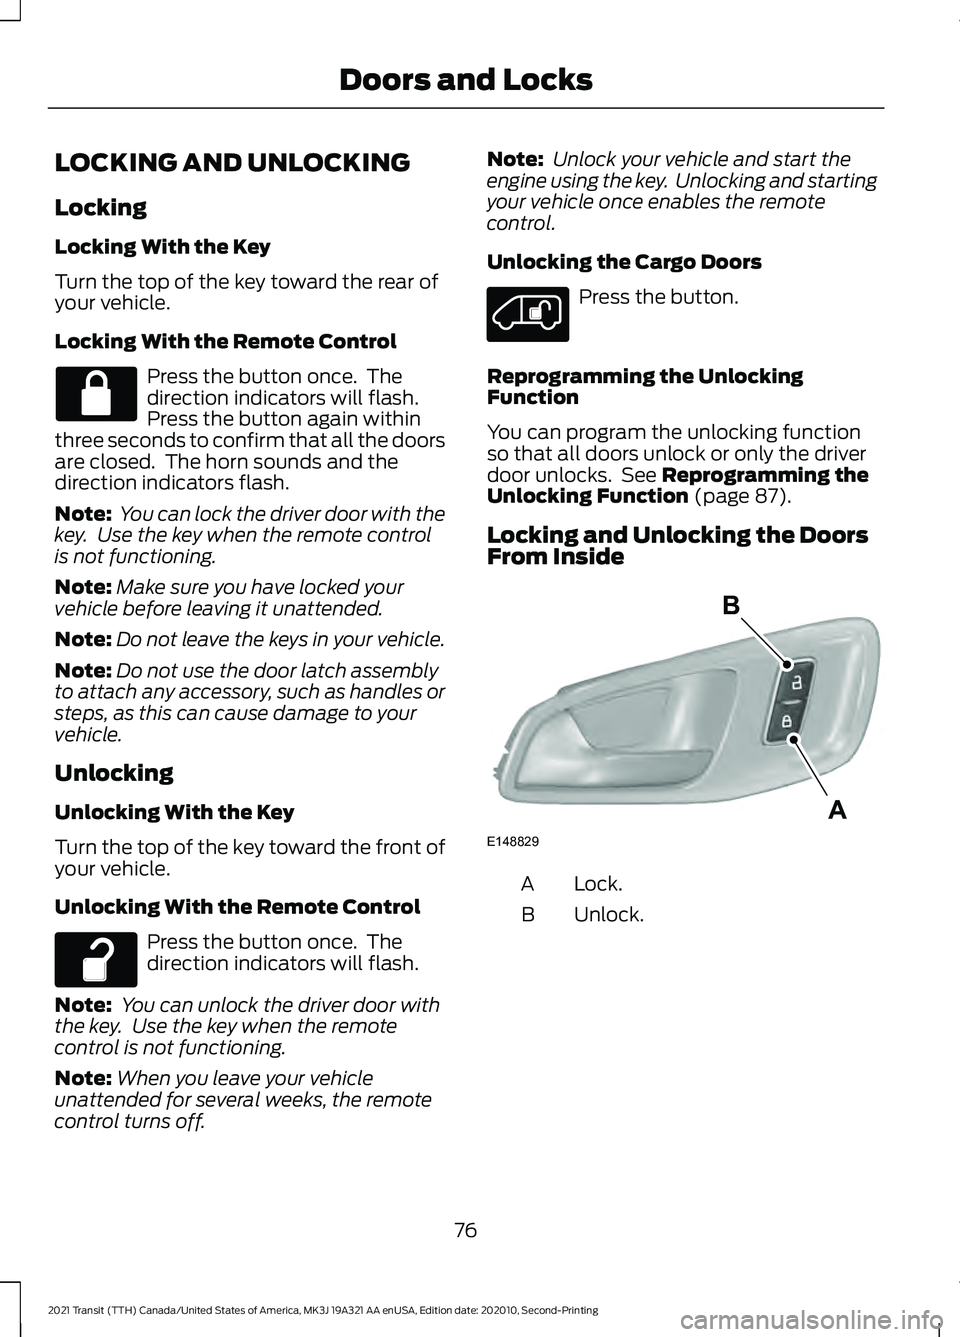 FORD TRANSIT 2021  Owners Manual LOCKING AND UNLOCKING
Locking
Locking With the Key
Turn the top of the key toward the rear of
your vehicle.
Locking With the Remote Control
Press the button once.  The
direction indicators will flash.